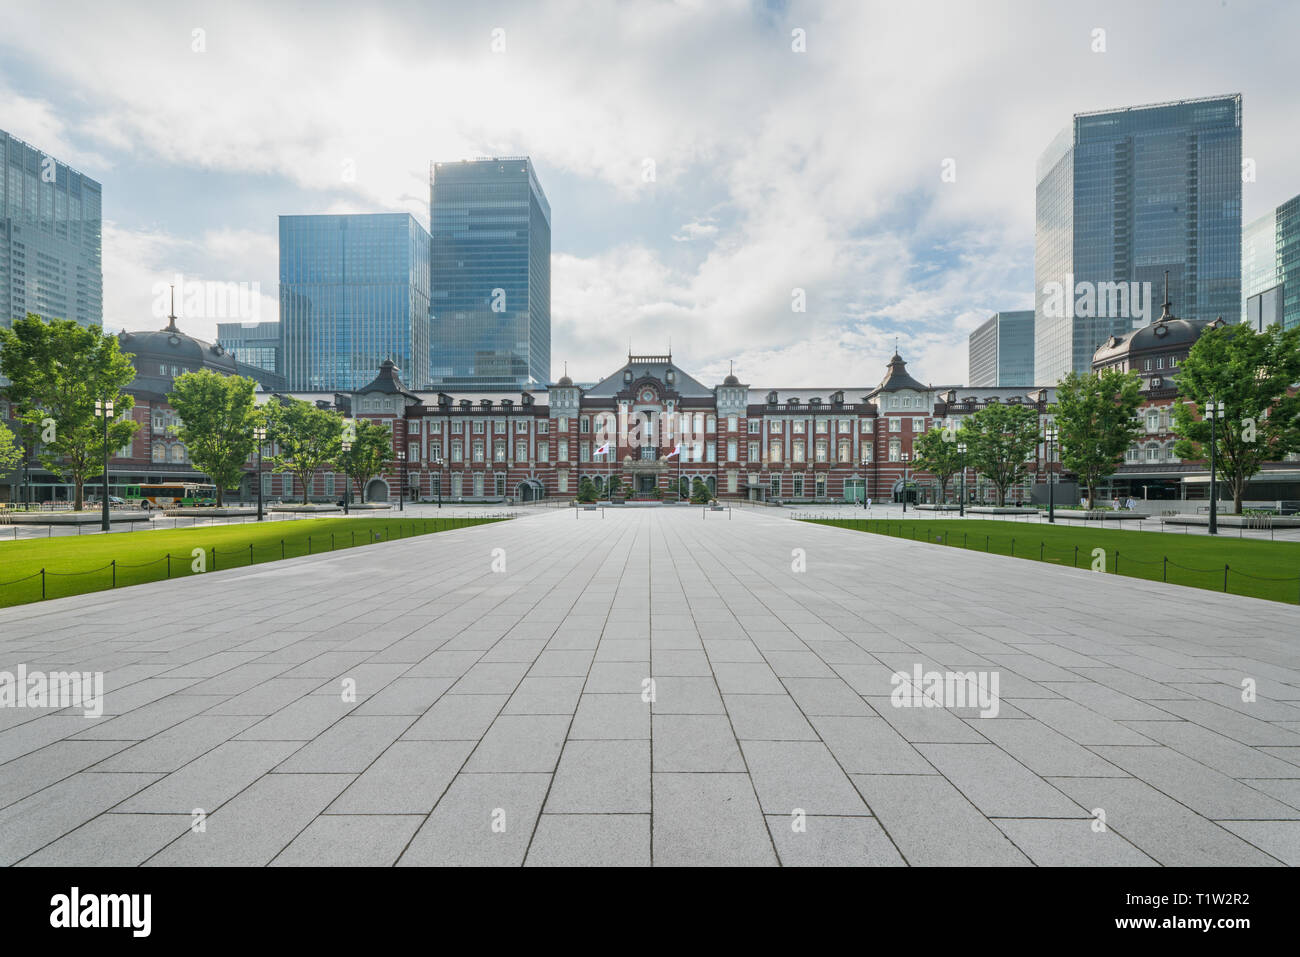 The old Tokyo Station front view in Tokyo, Japan Stock Photo